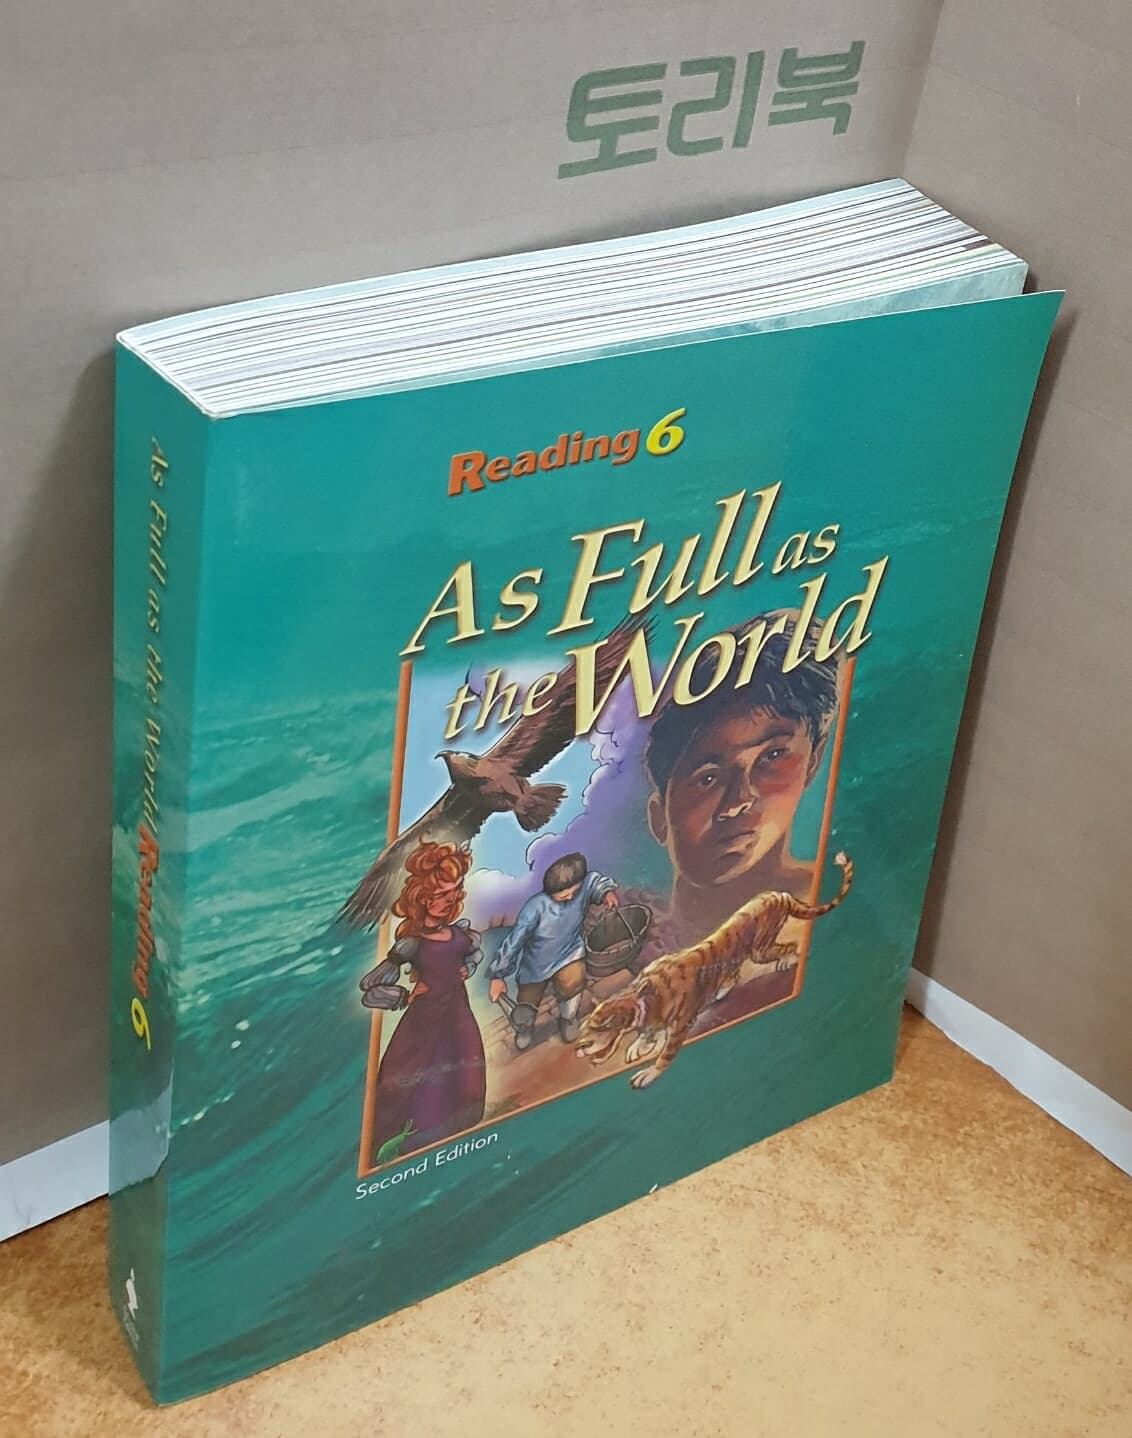 Reading 6 Student Text : As Full as the World